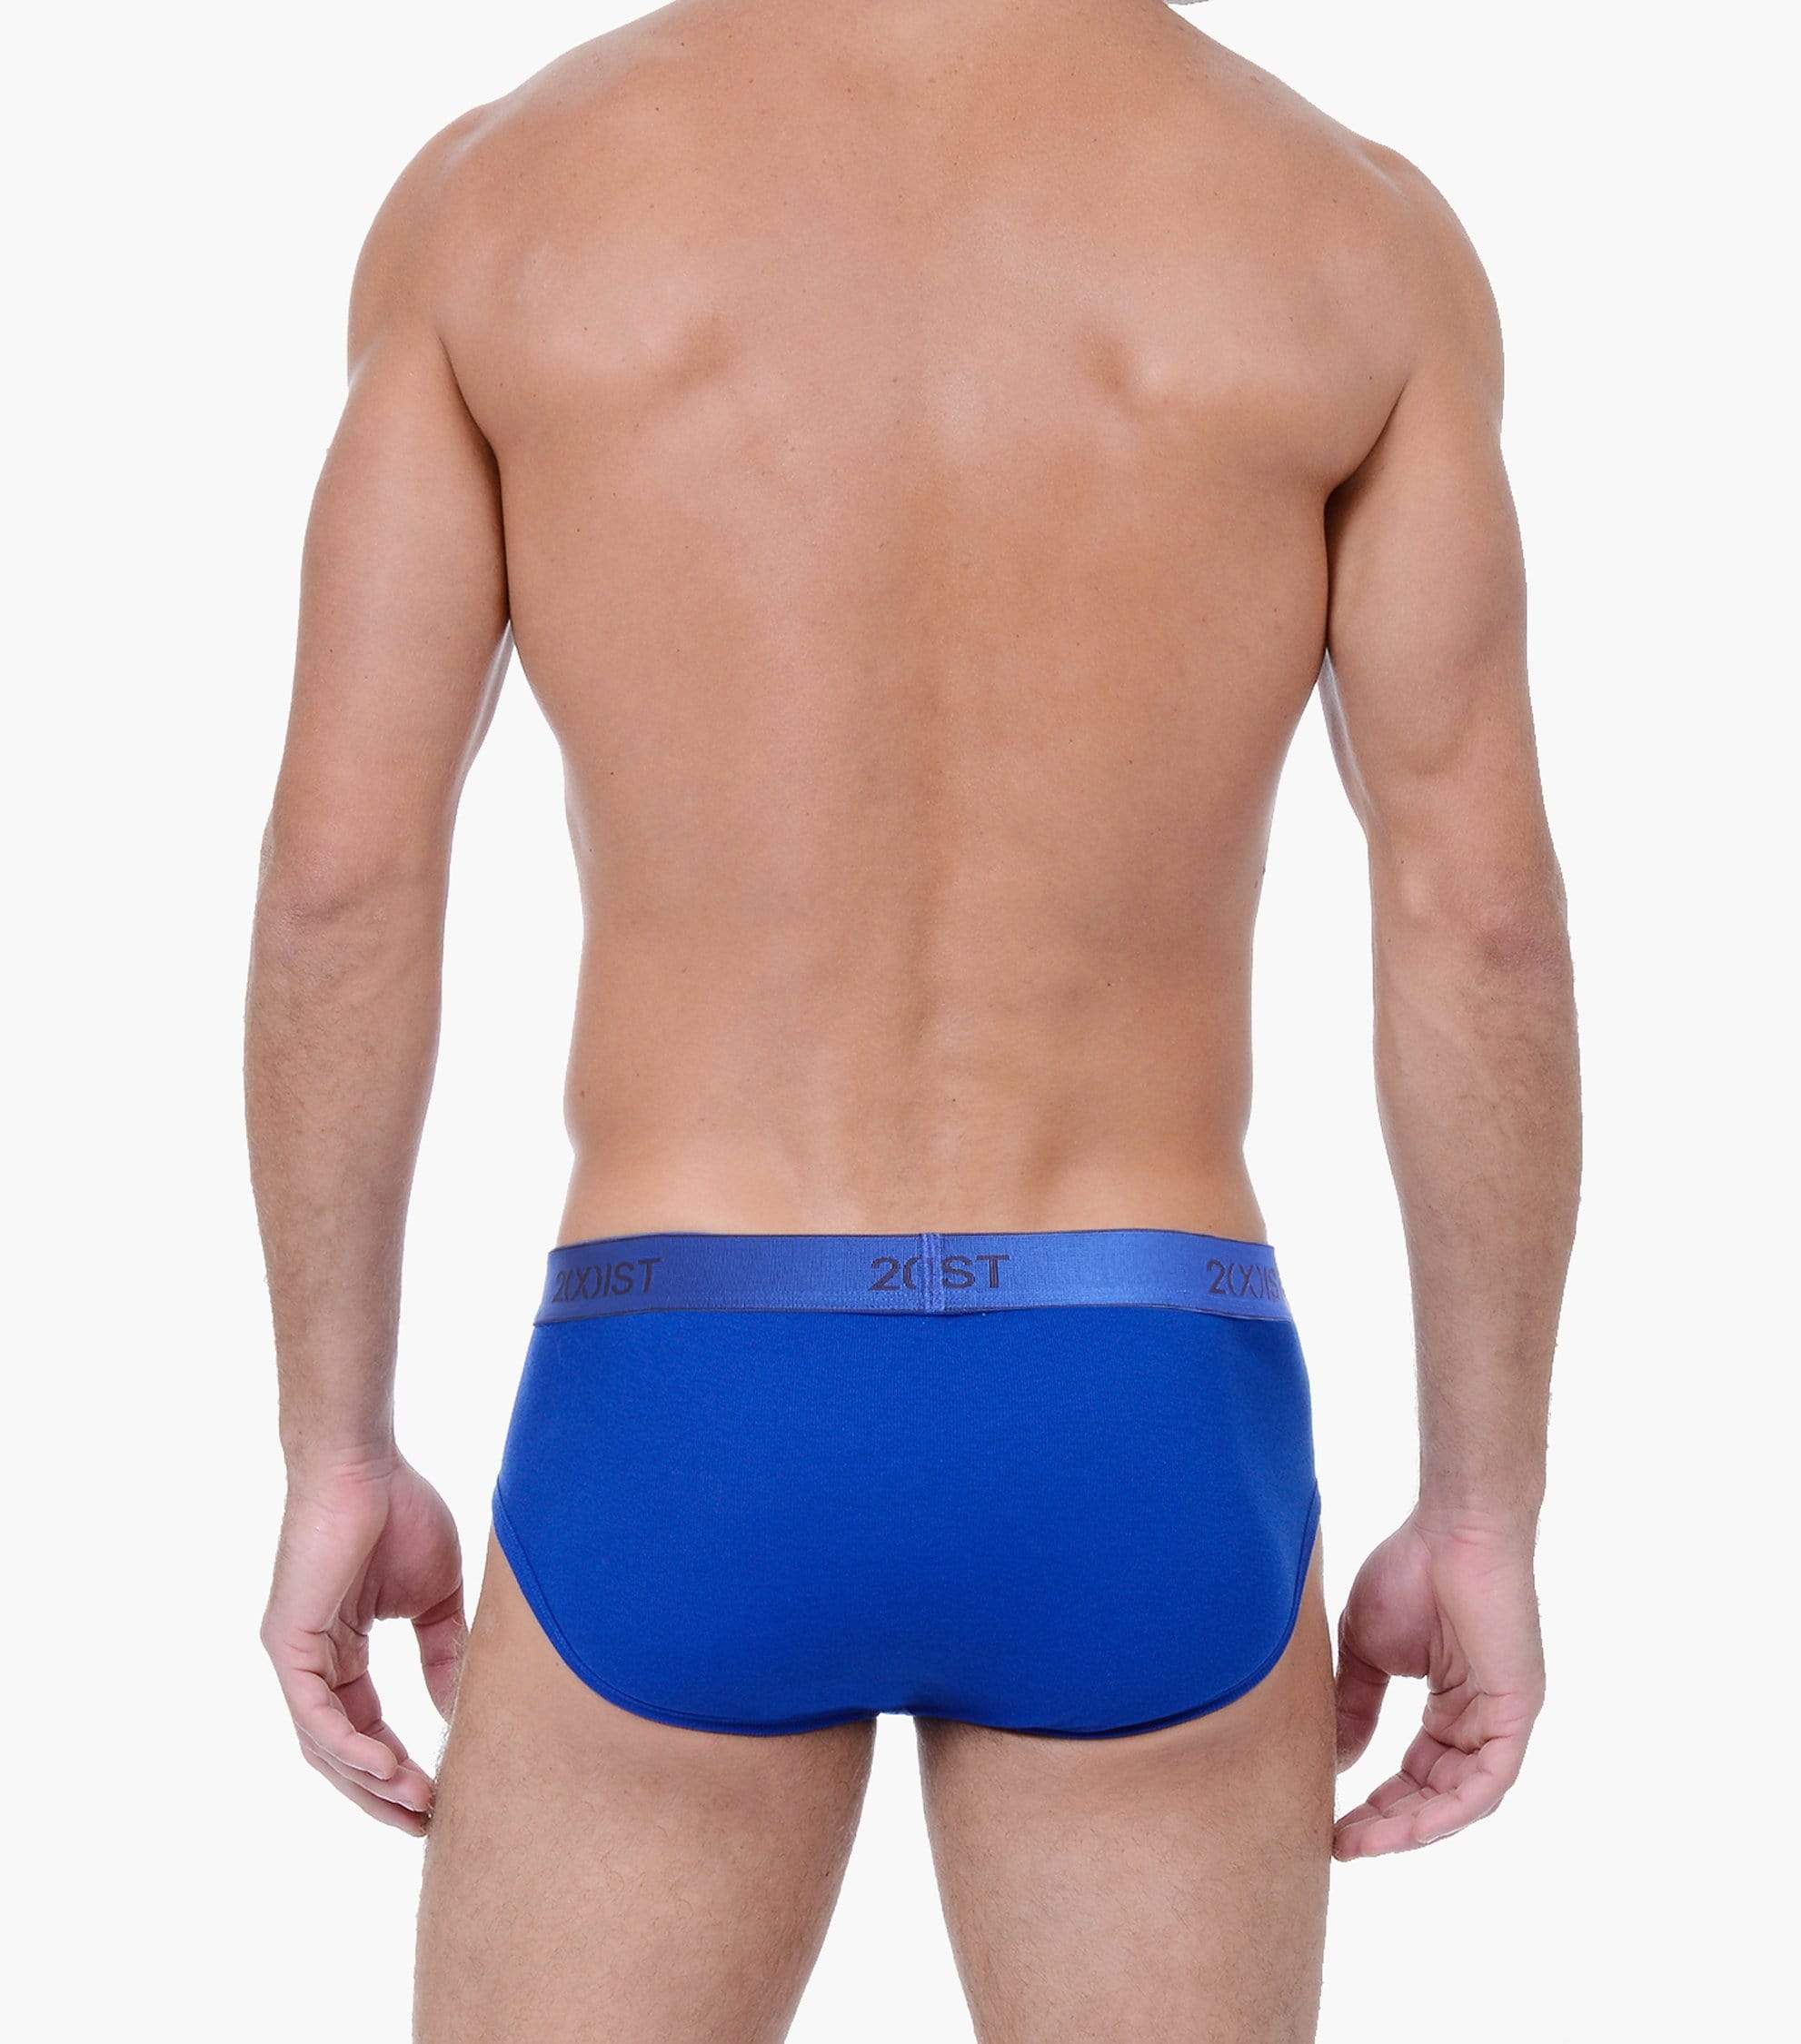 Men's Sexy Ribbed Cotton Fly Pouch Brief Underwear